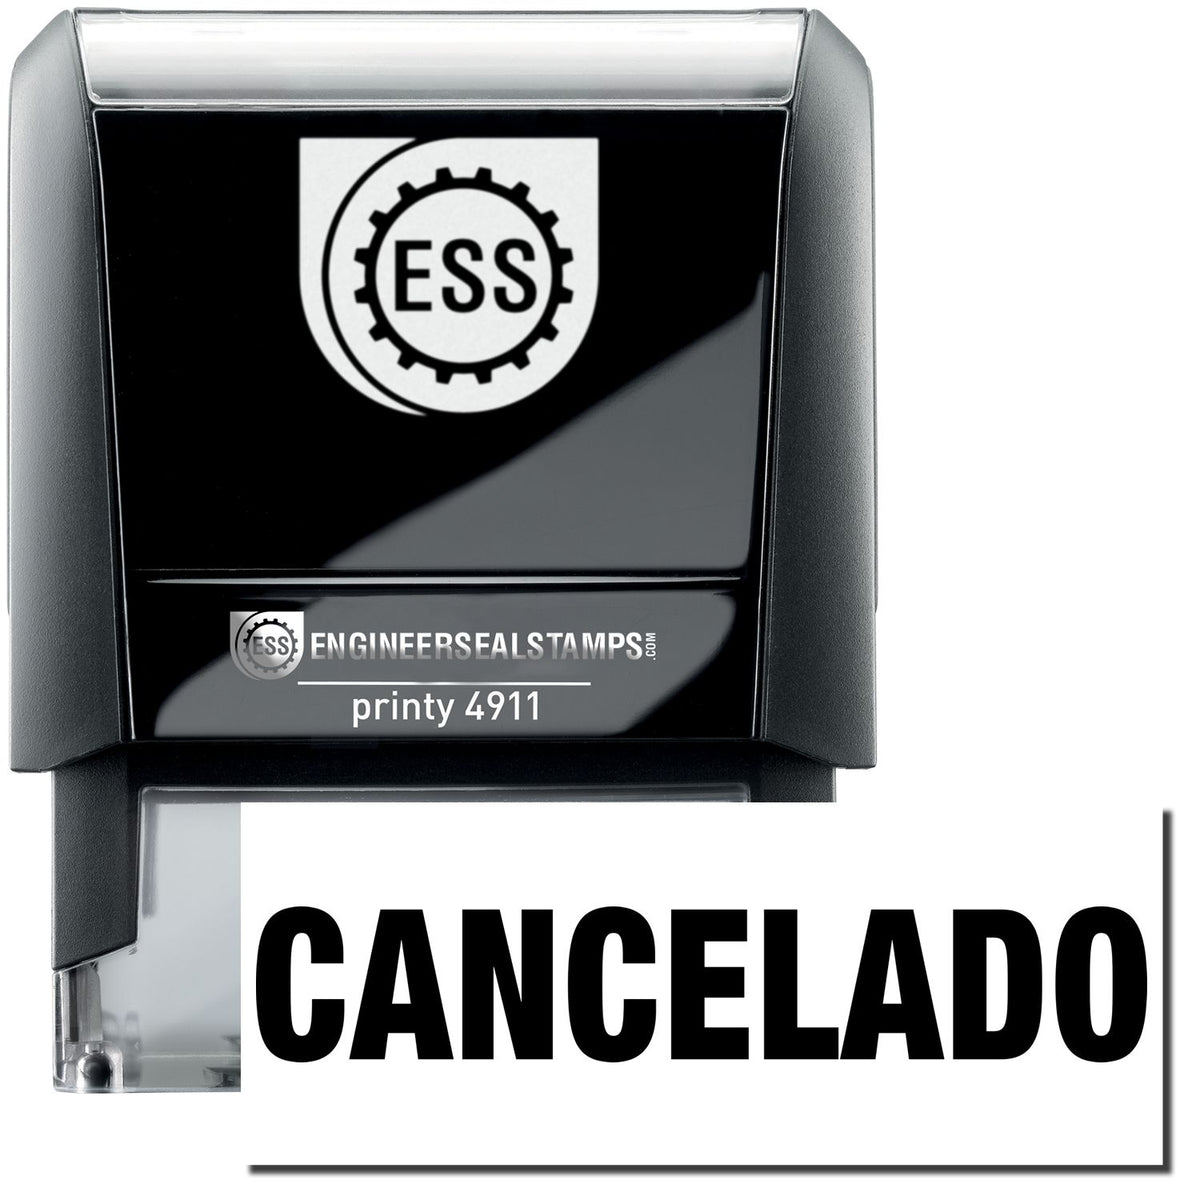 A self-inking stamp with a stamped image showing how the text &quot;CANCELADO&quot; is displayed after stamping.